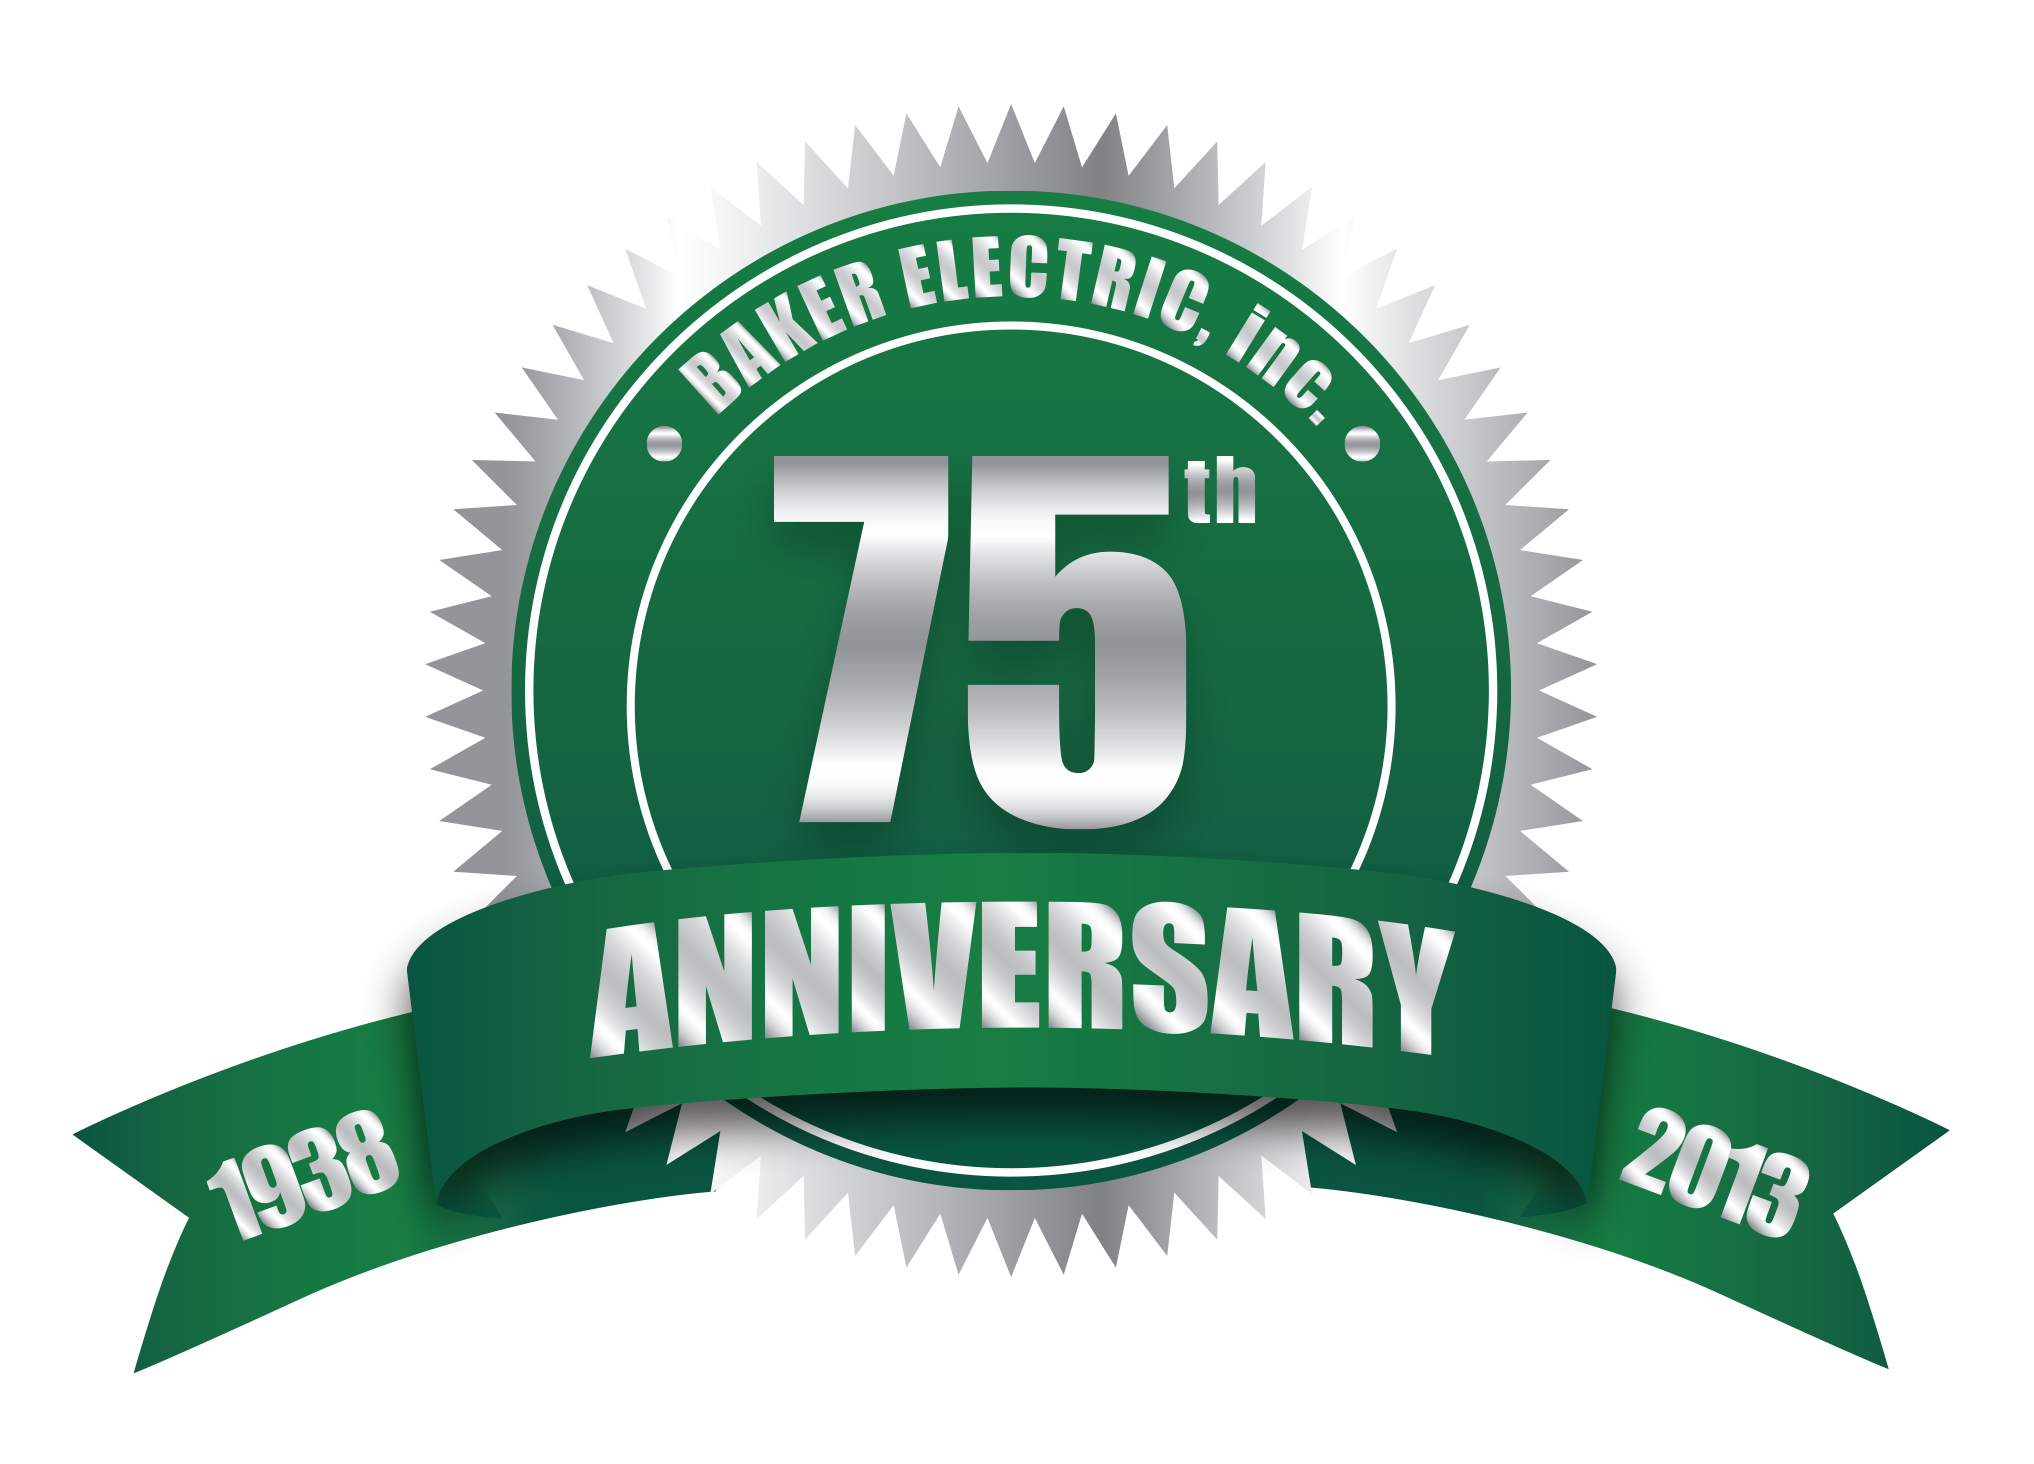 Baker Electric, Inc. celebrates 75 years of business in 2013.